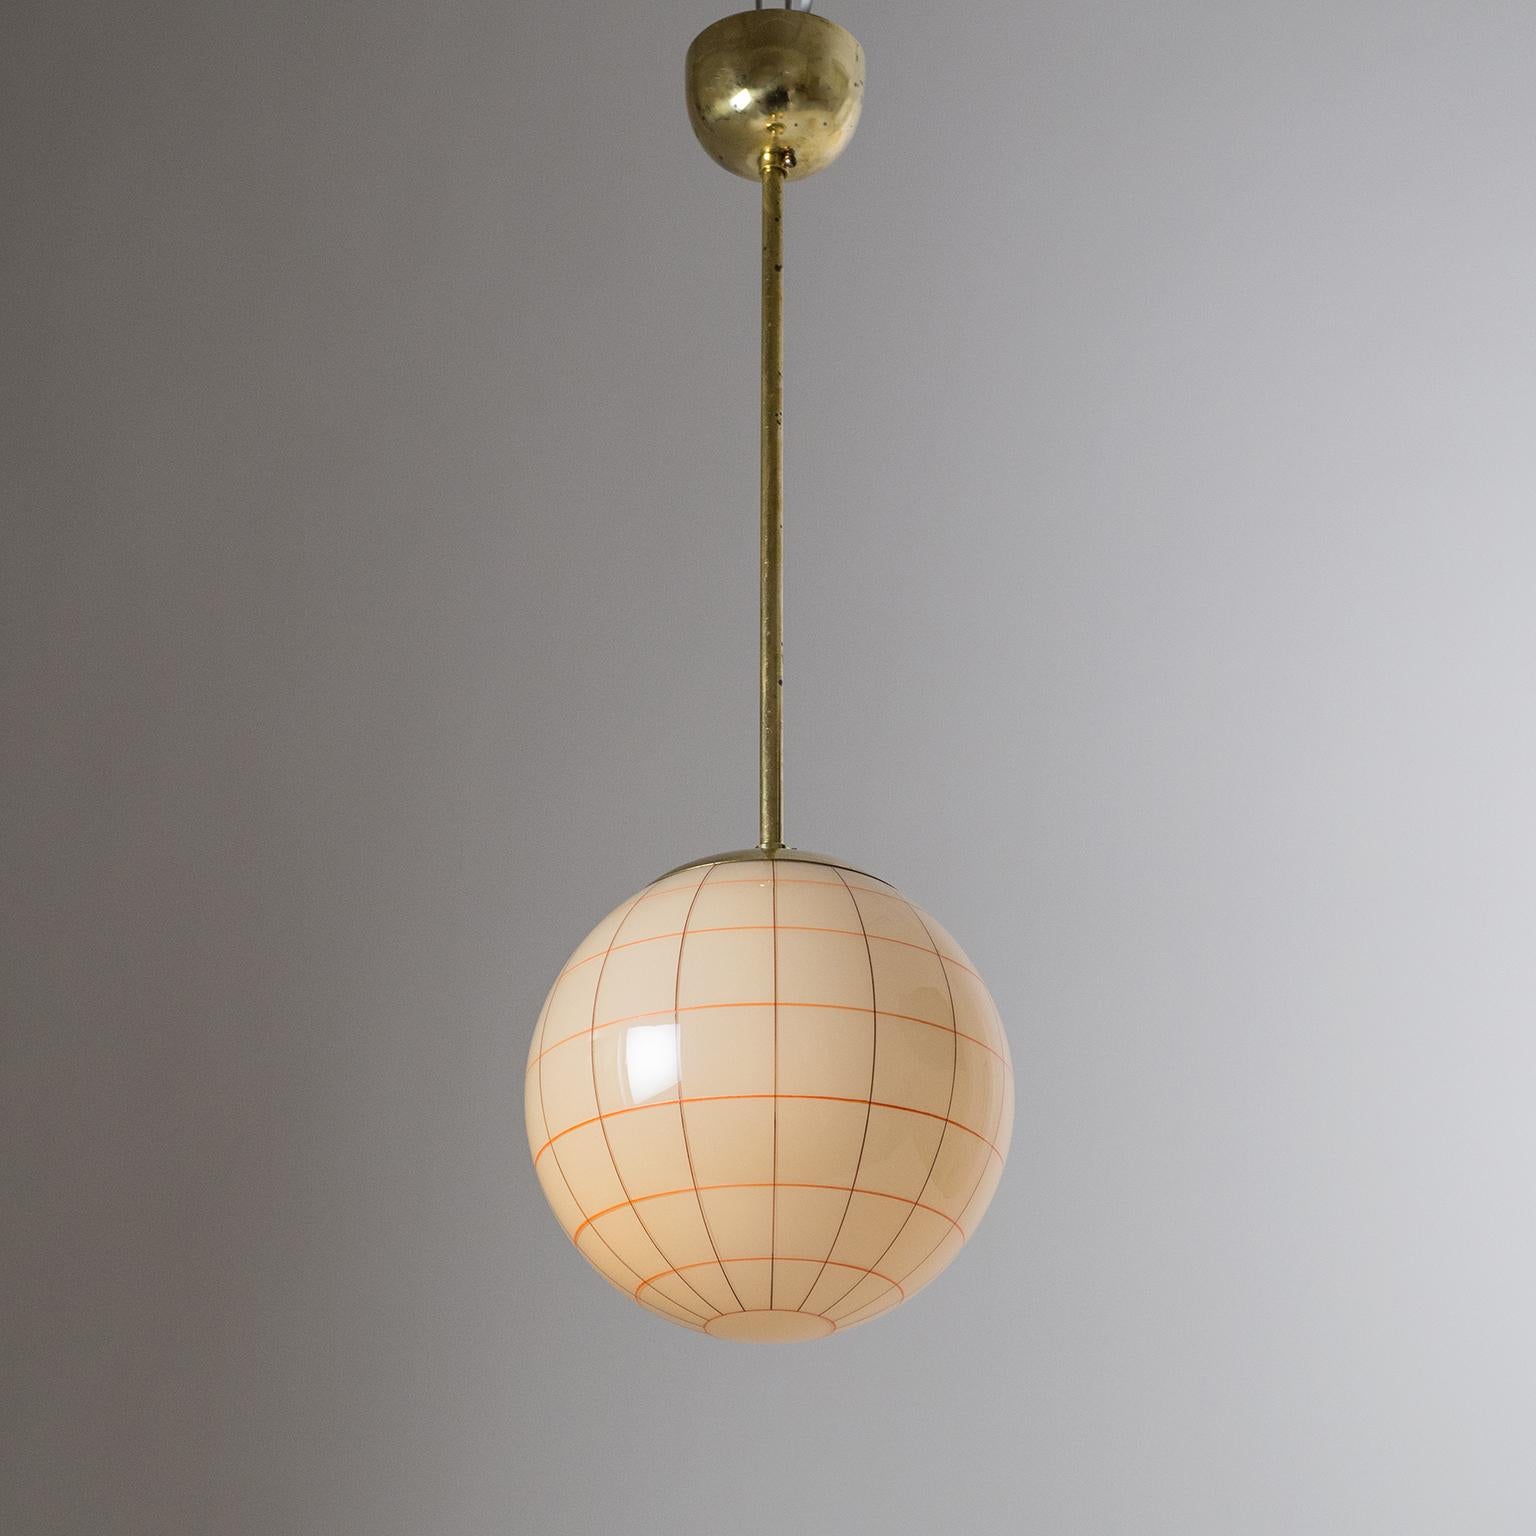 Lovely Art Deco glass pendant from the 1930s. The color of the glass is perhaps best described as 'pastel peach' or perhaps 'caramel cream' and has very fine meridians hand-painted in red and dark brown. The paint and glass are in beautiful original